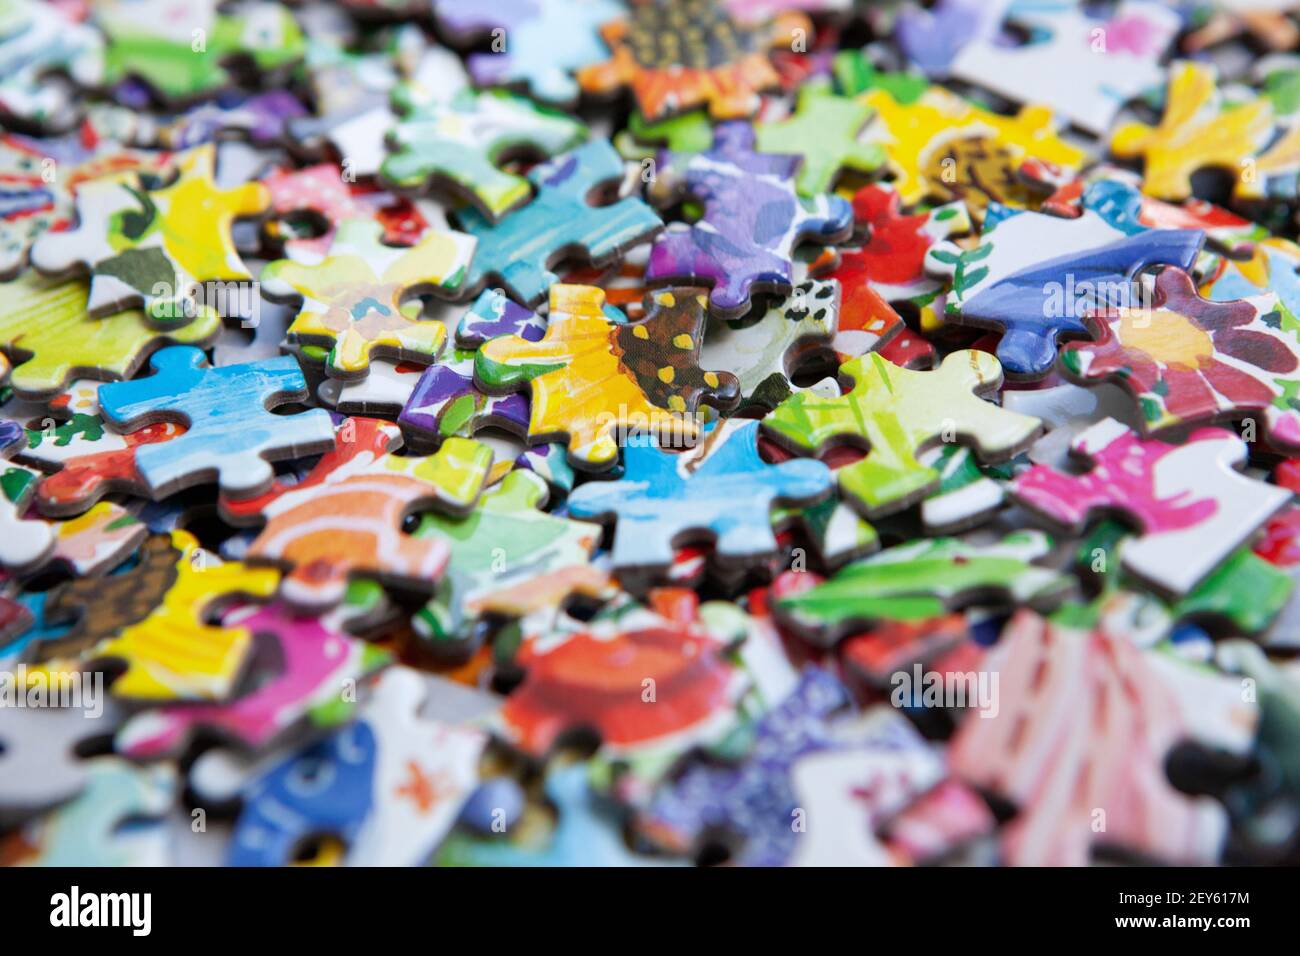 London, UK, 5 March 2021: a box of colourful jigsaw pieces. During the pandemic lockdowns sales of jigsaws have risen as people look for ways to pass Stock Photo